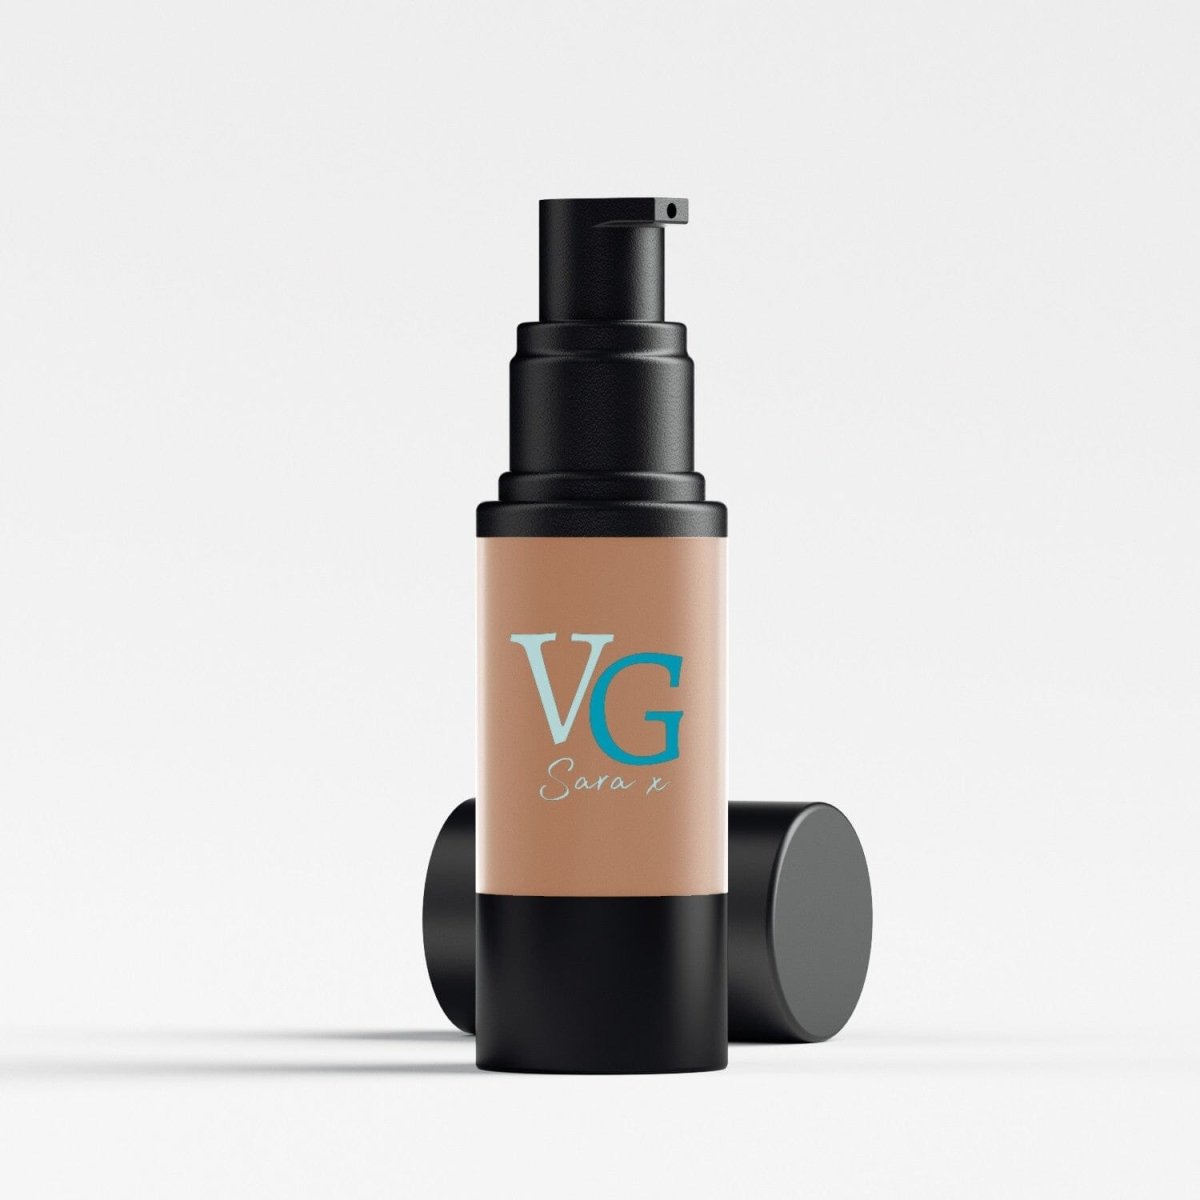 VG Cosmetics Blemish Balm Cream in its container